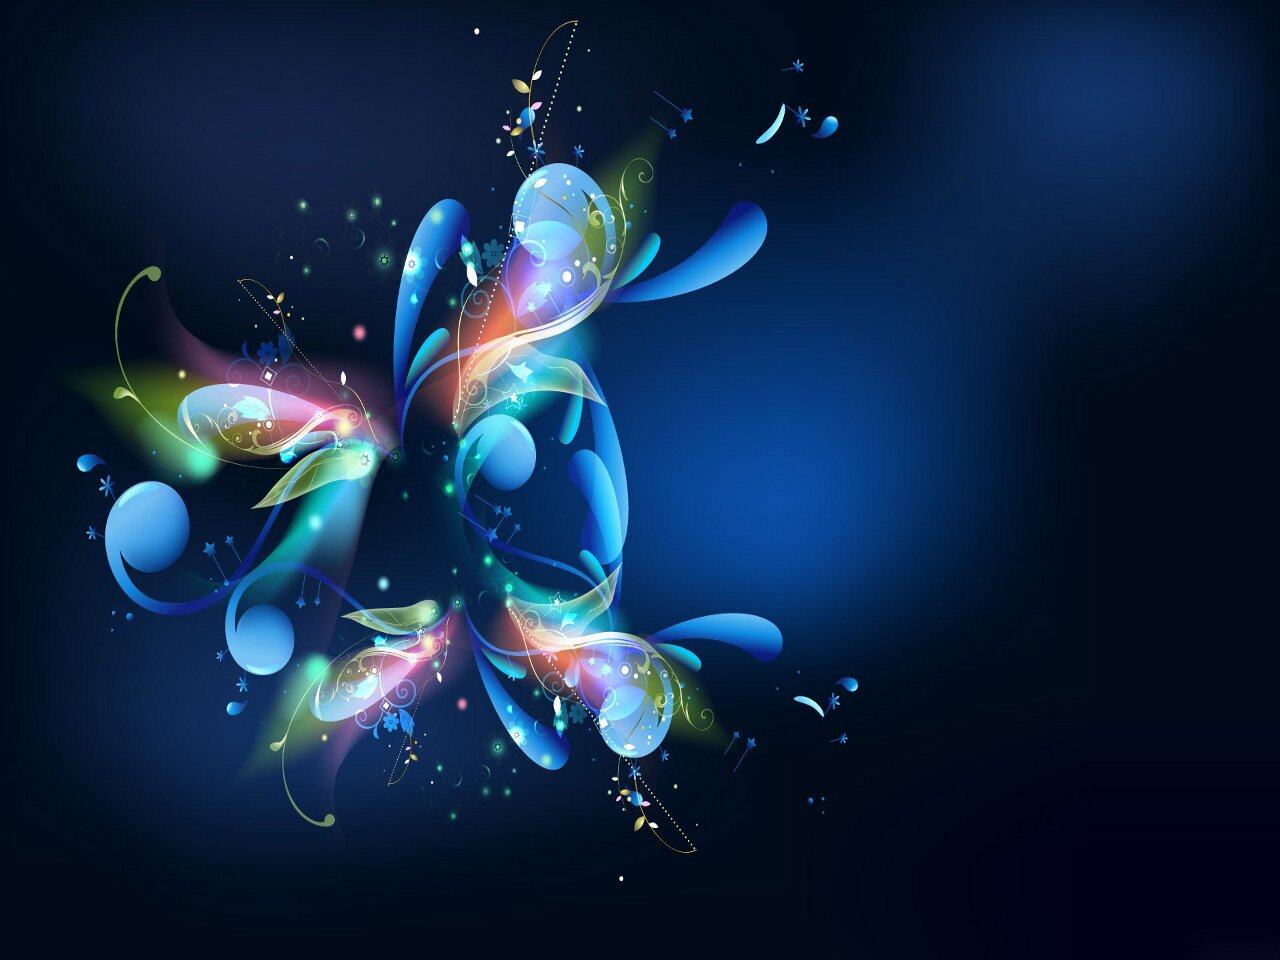 Wallpaper Background Blue Abstract Flowers Coverlayouts Girly Fb